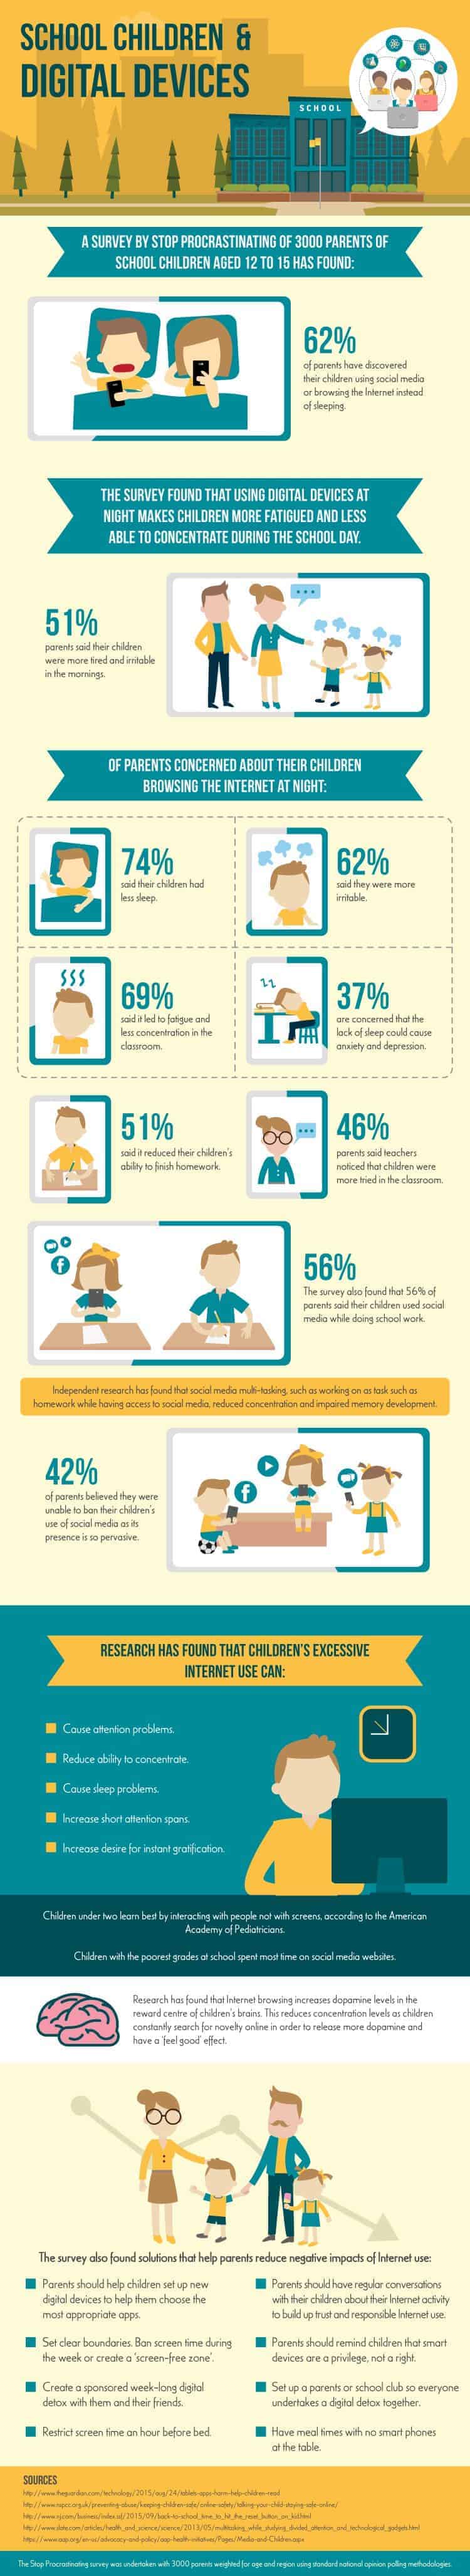 Do you know how your child's internet use could affect them? 1